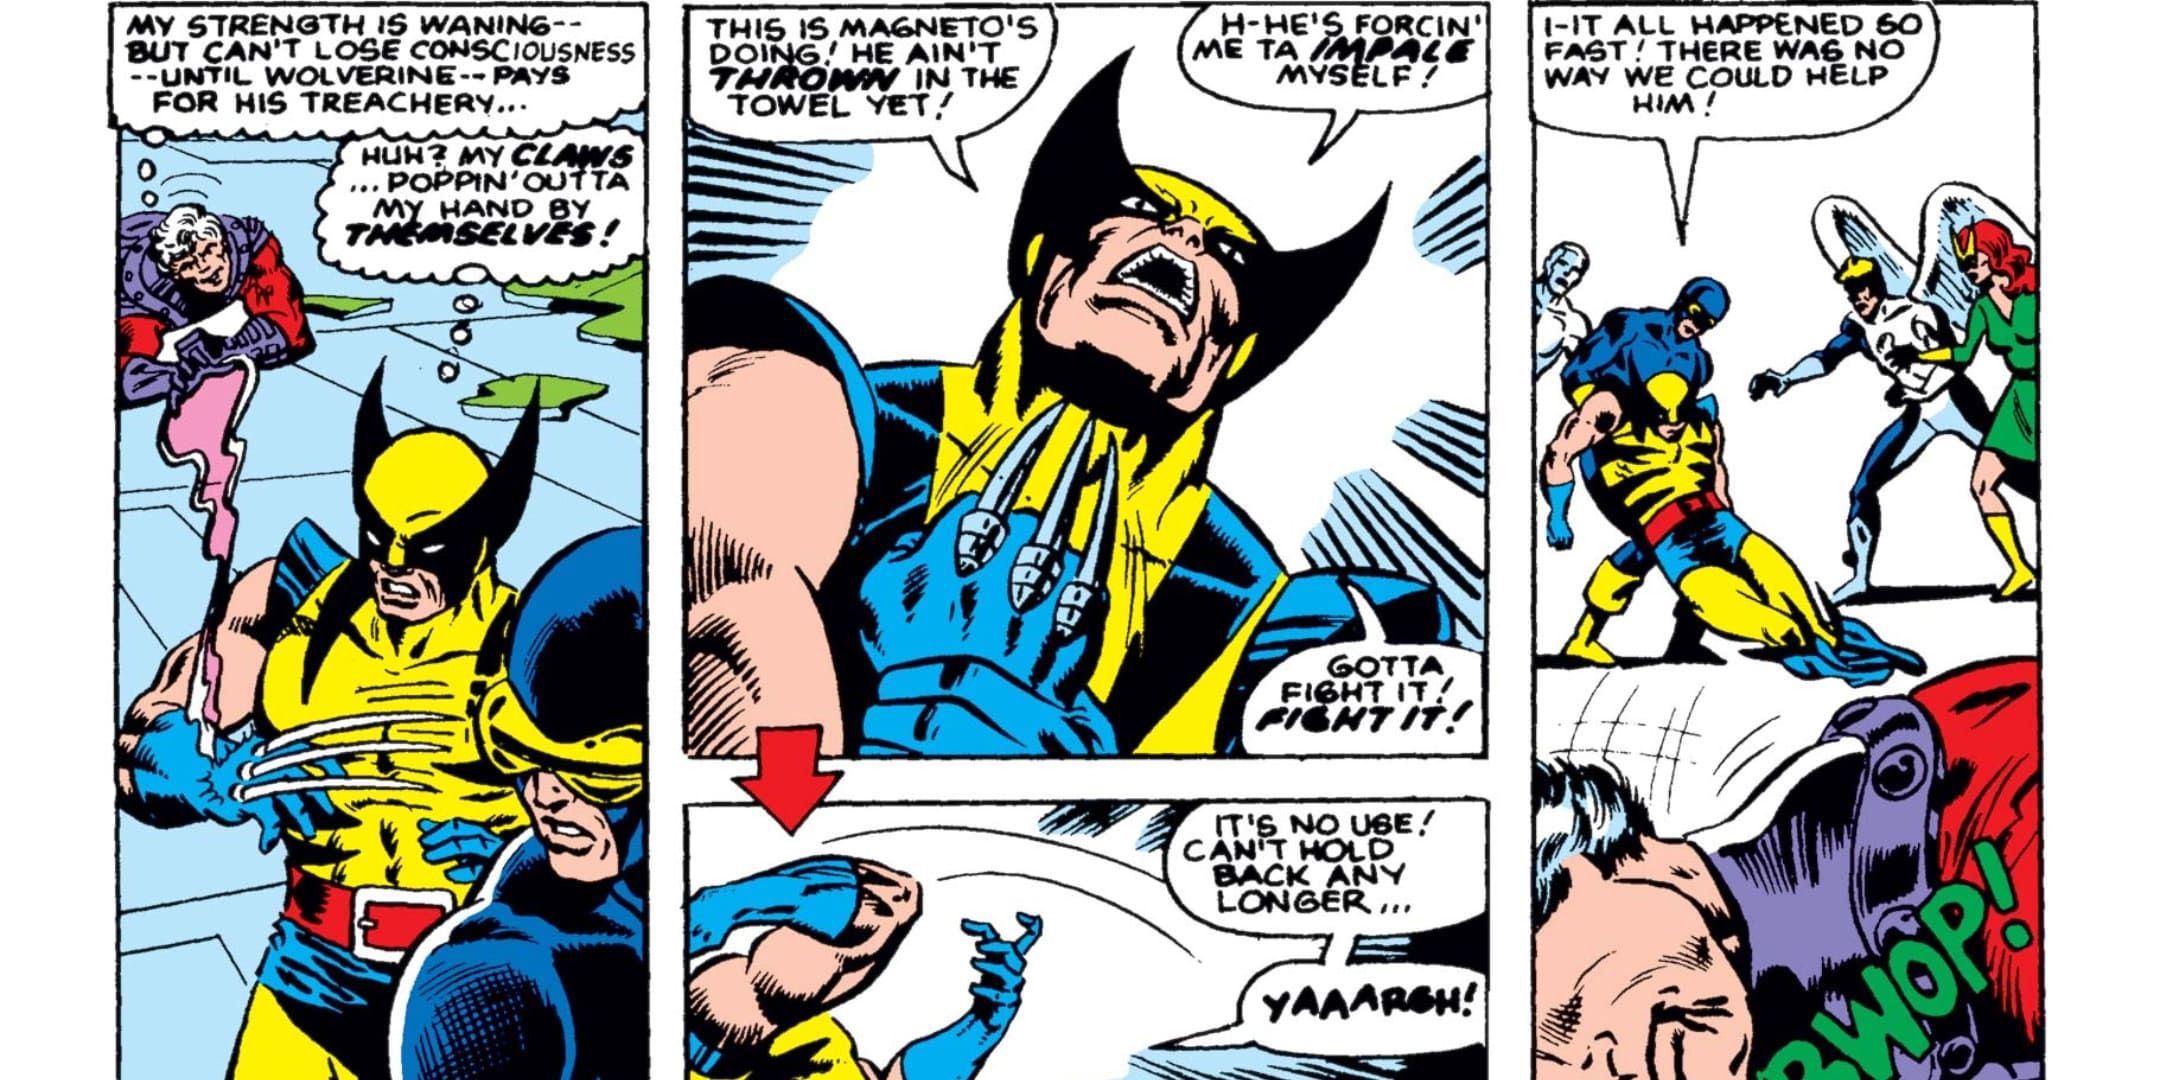 Wolverine is forced to stab himself by Magneto.